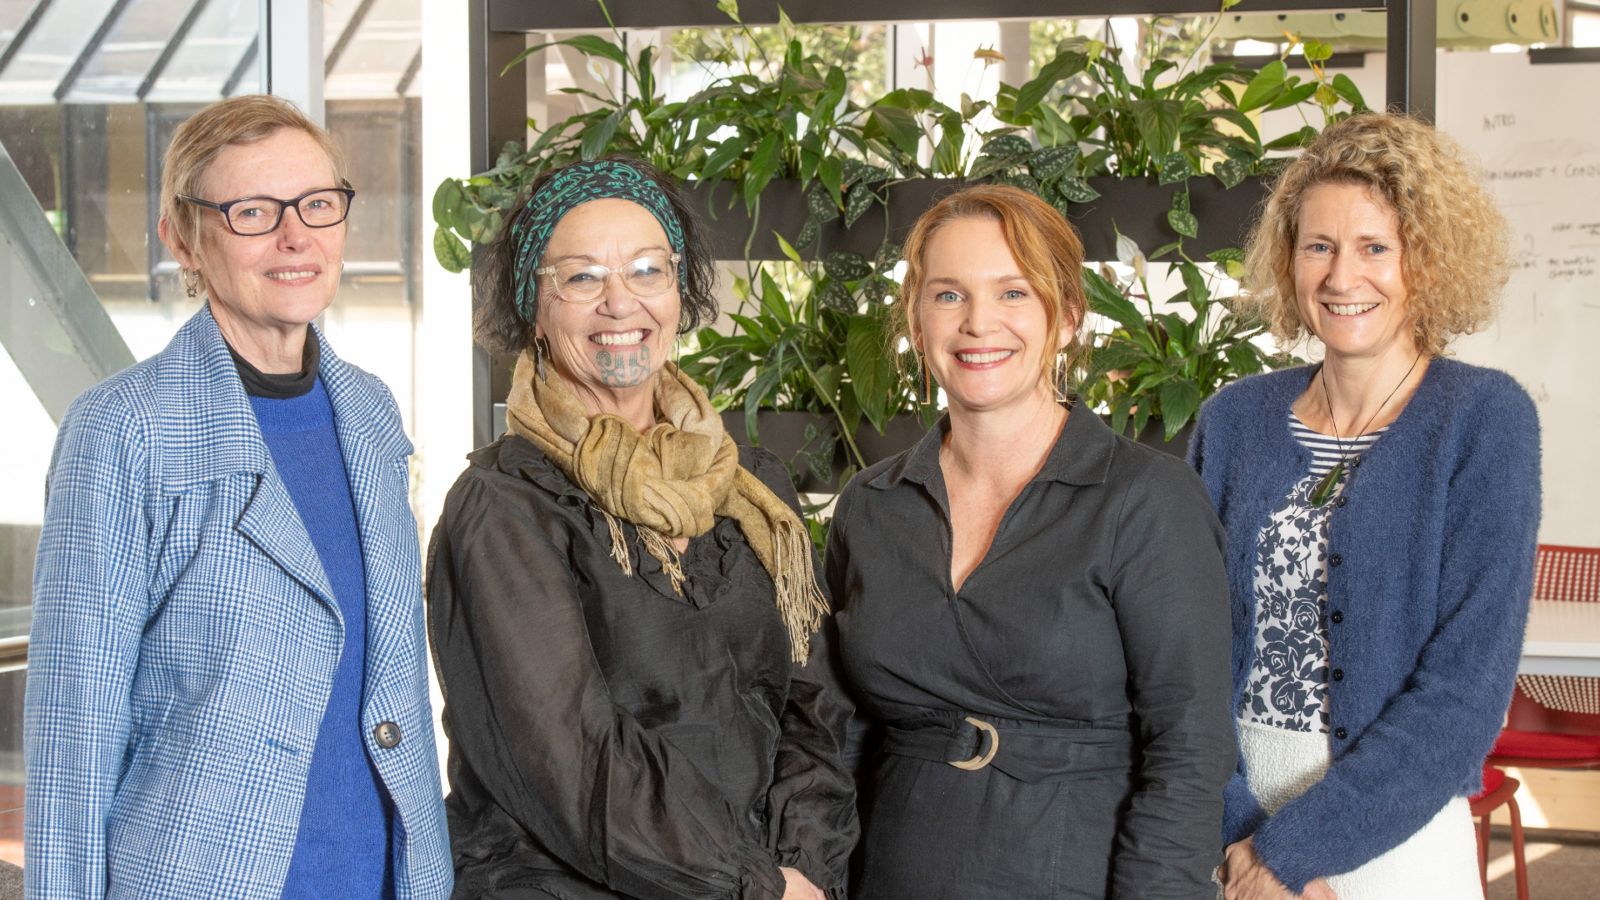 Four members of the centre research team pose for a photo with plants in the background